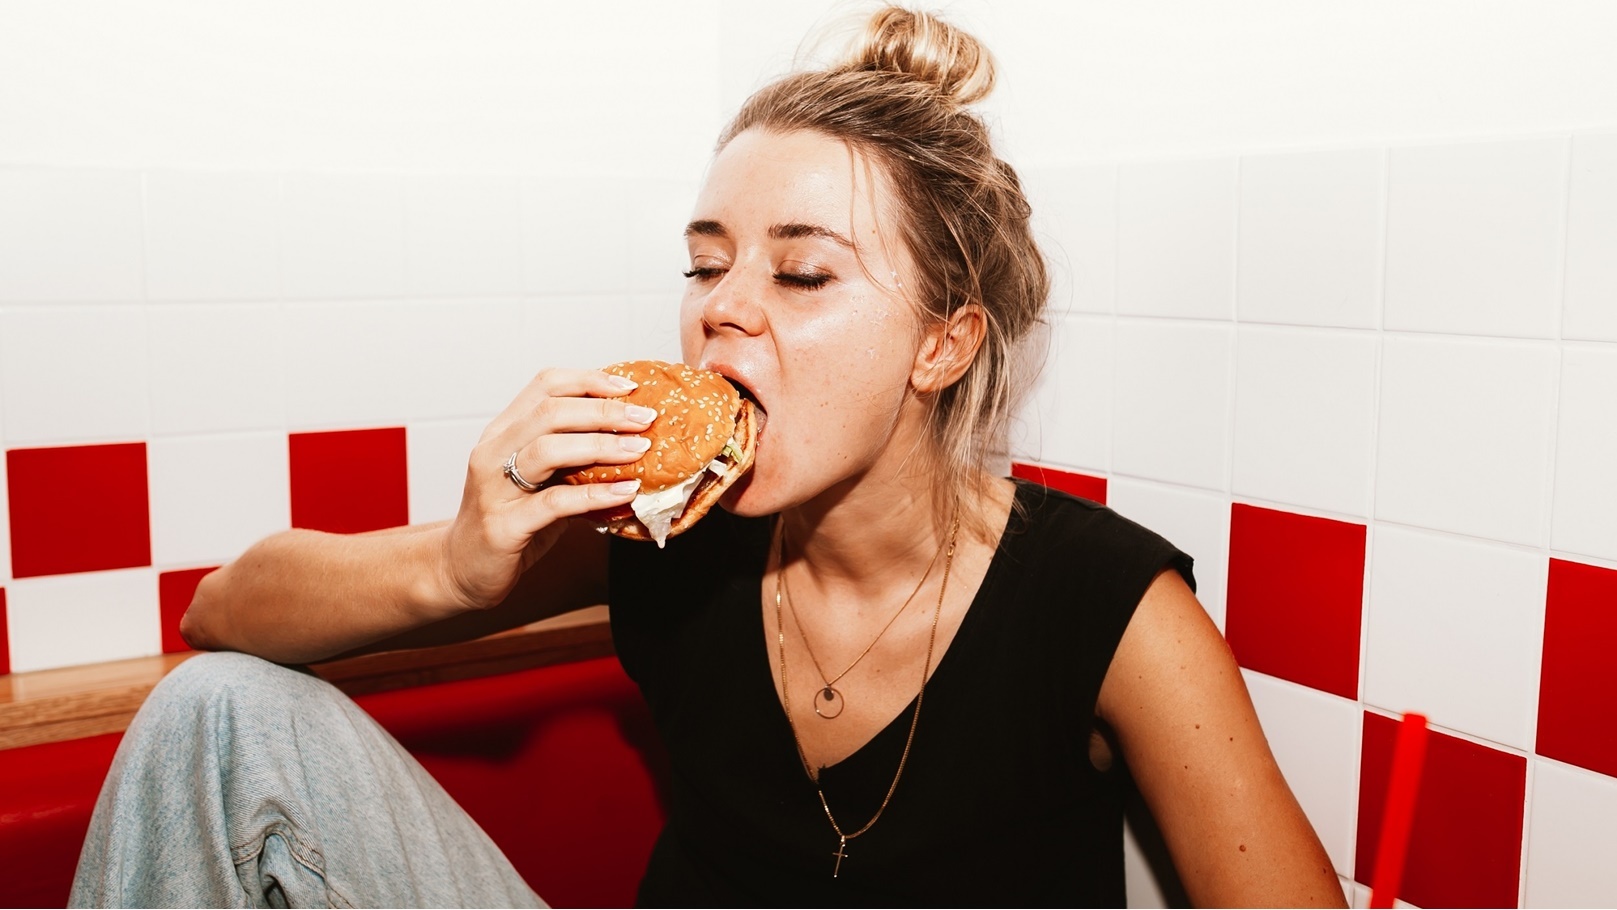 tiny-girl-eating-burger-and-french-fries-drinking-2021-08-29-15-11-30-utc